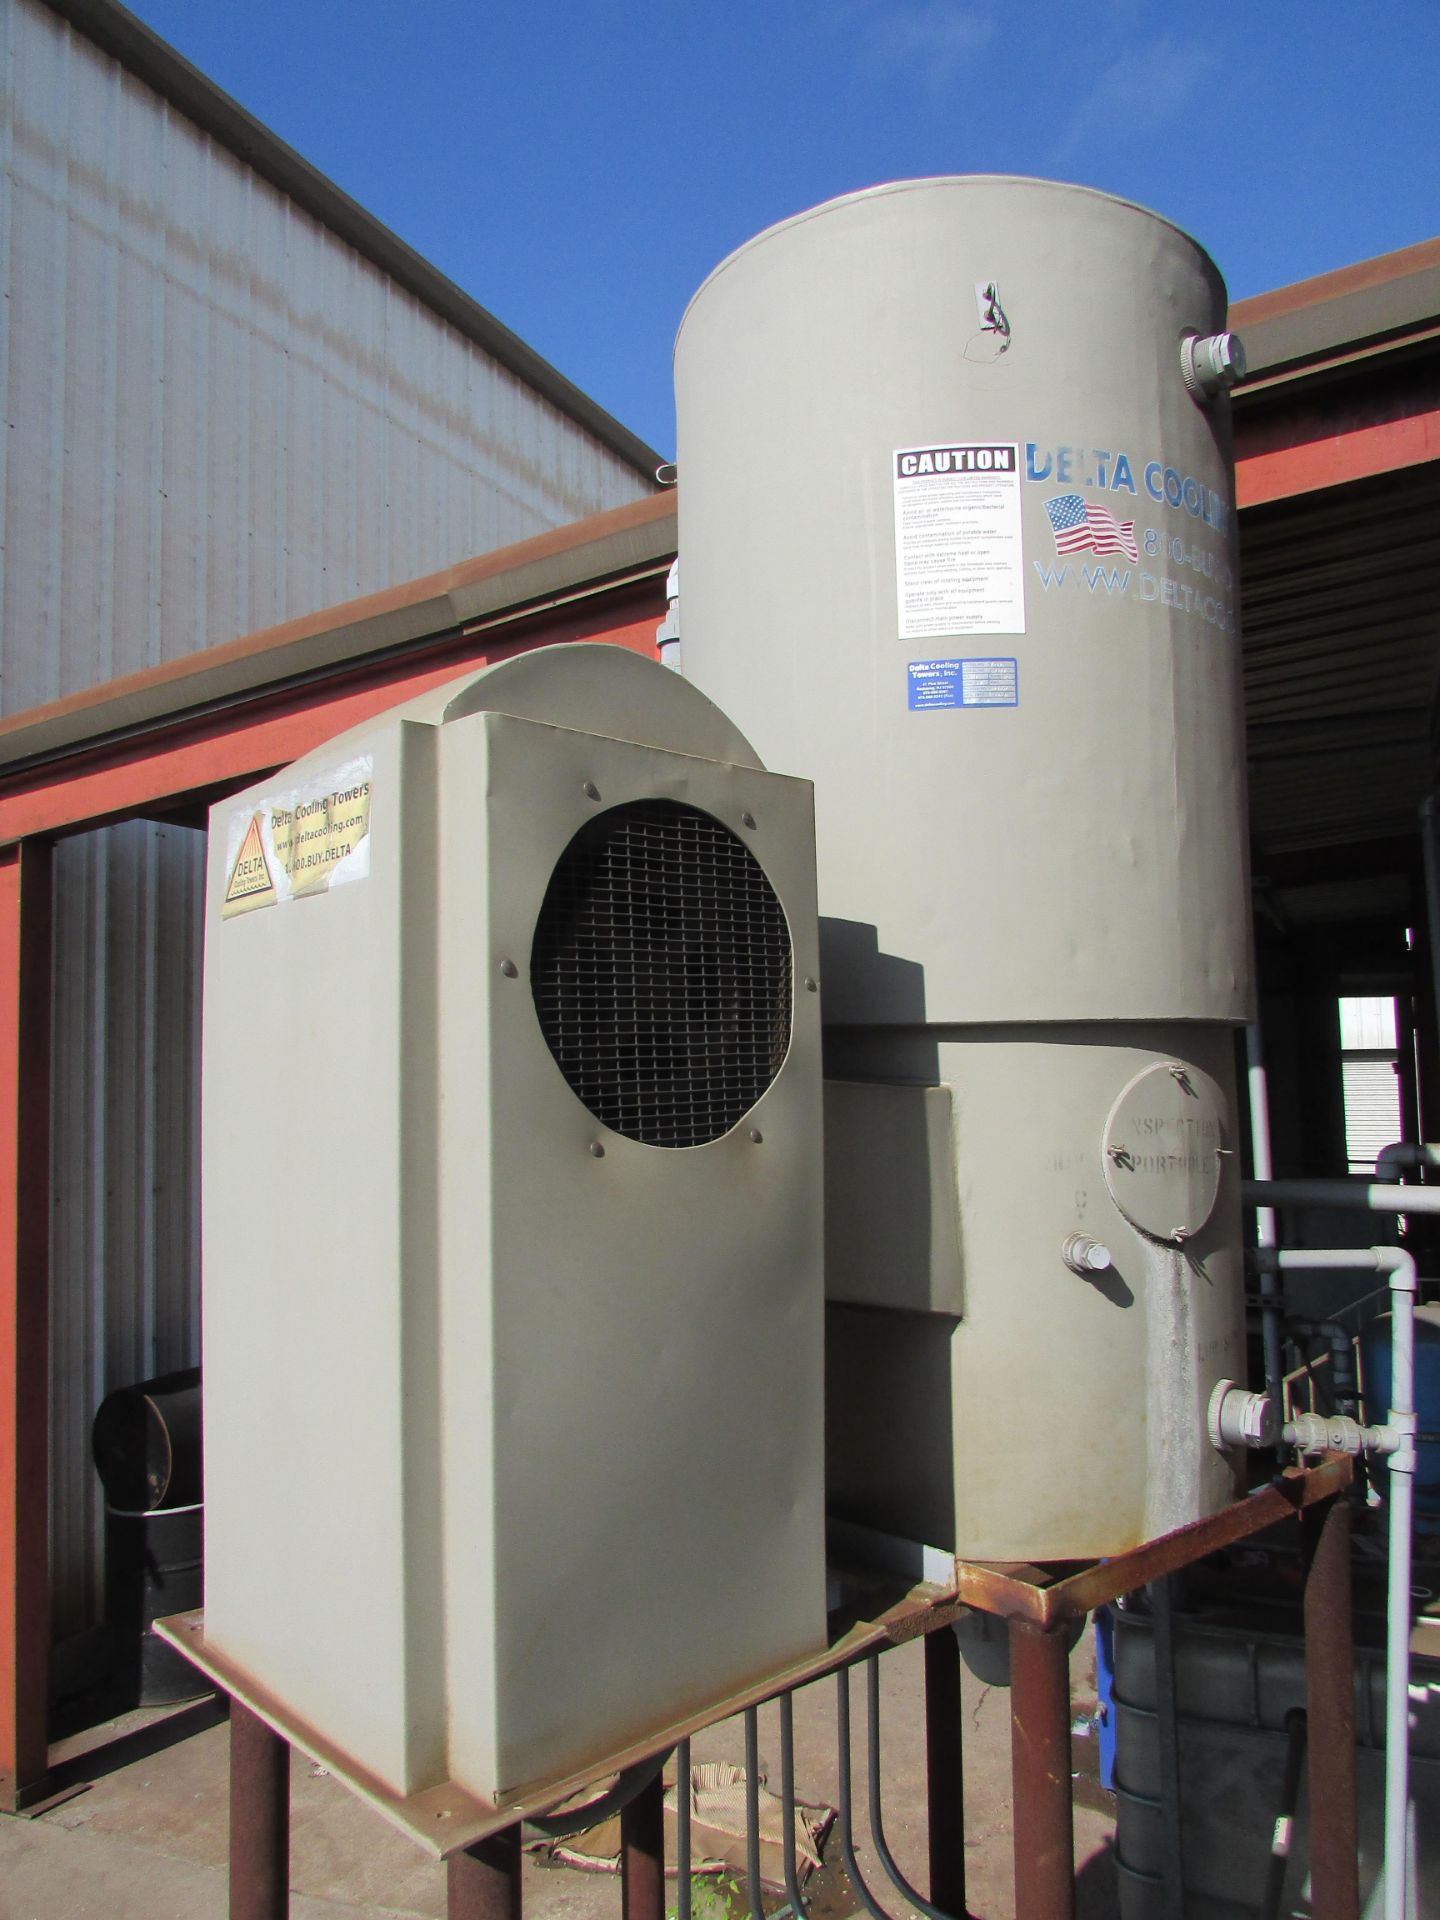 2011 Delta Cooling Towers T-10 1HP 35GPM Cooling Tower - Image 4 of 14